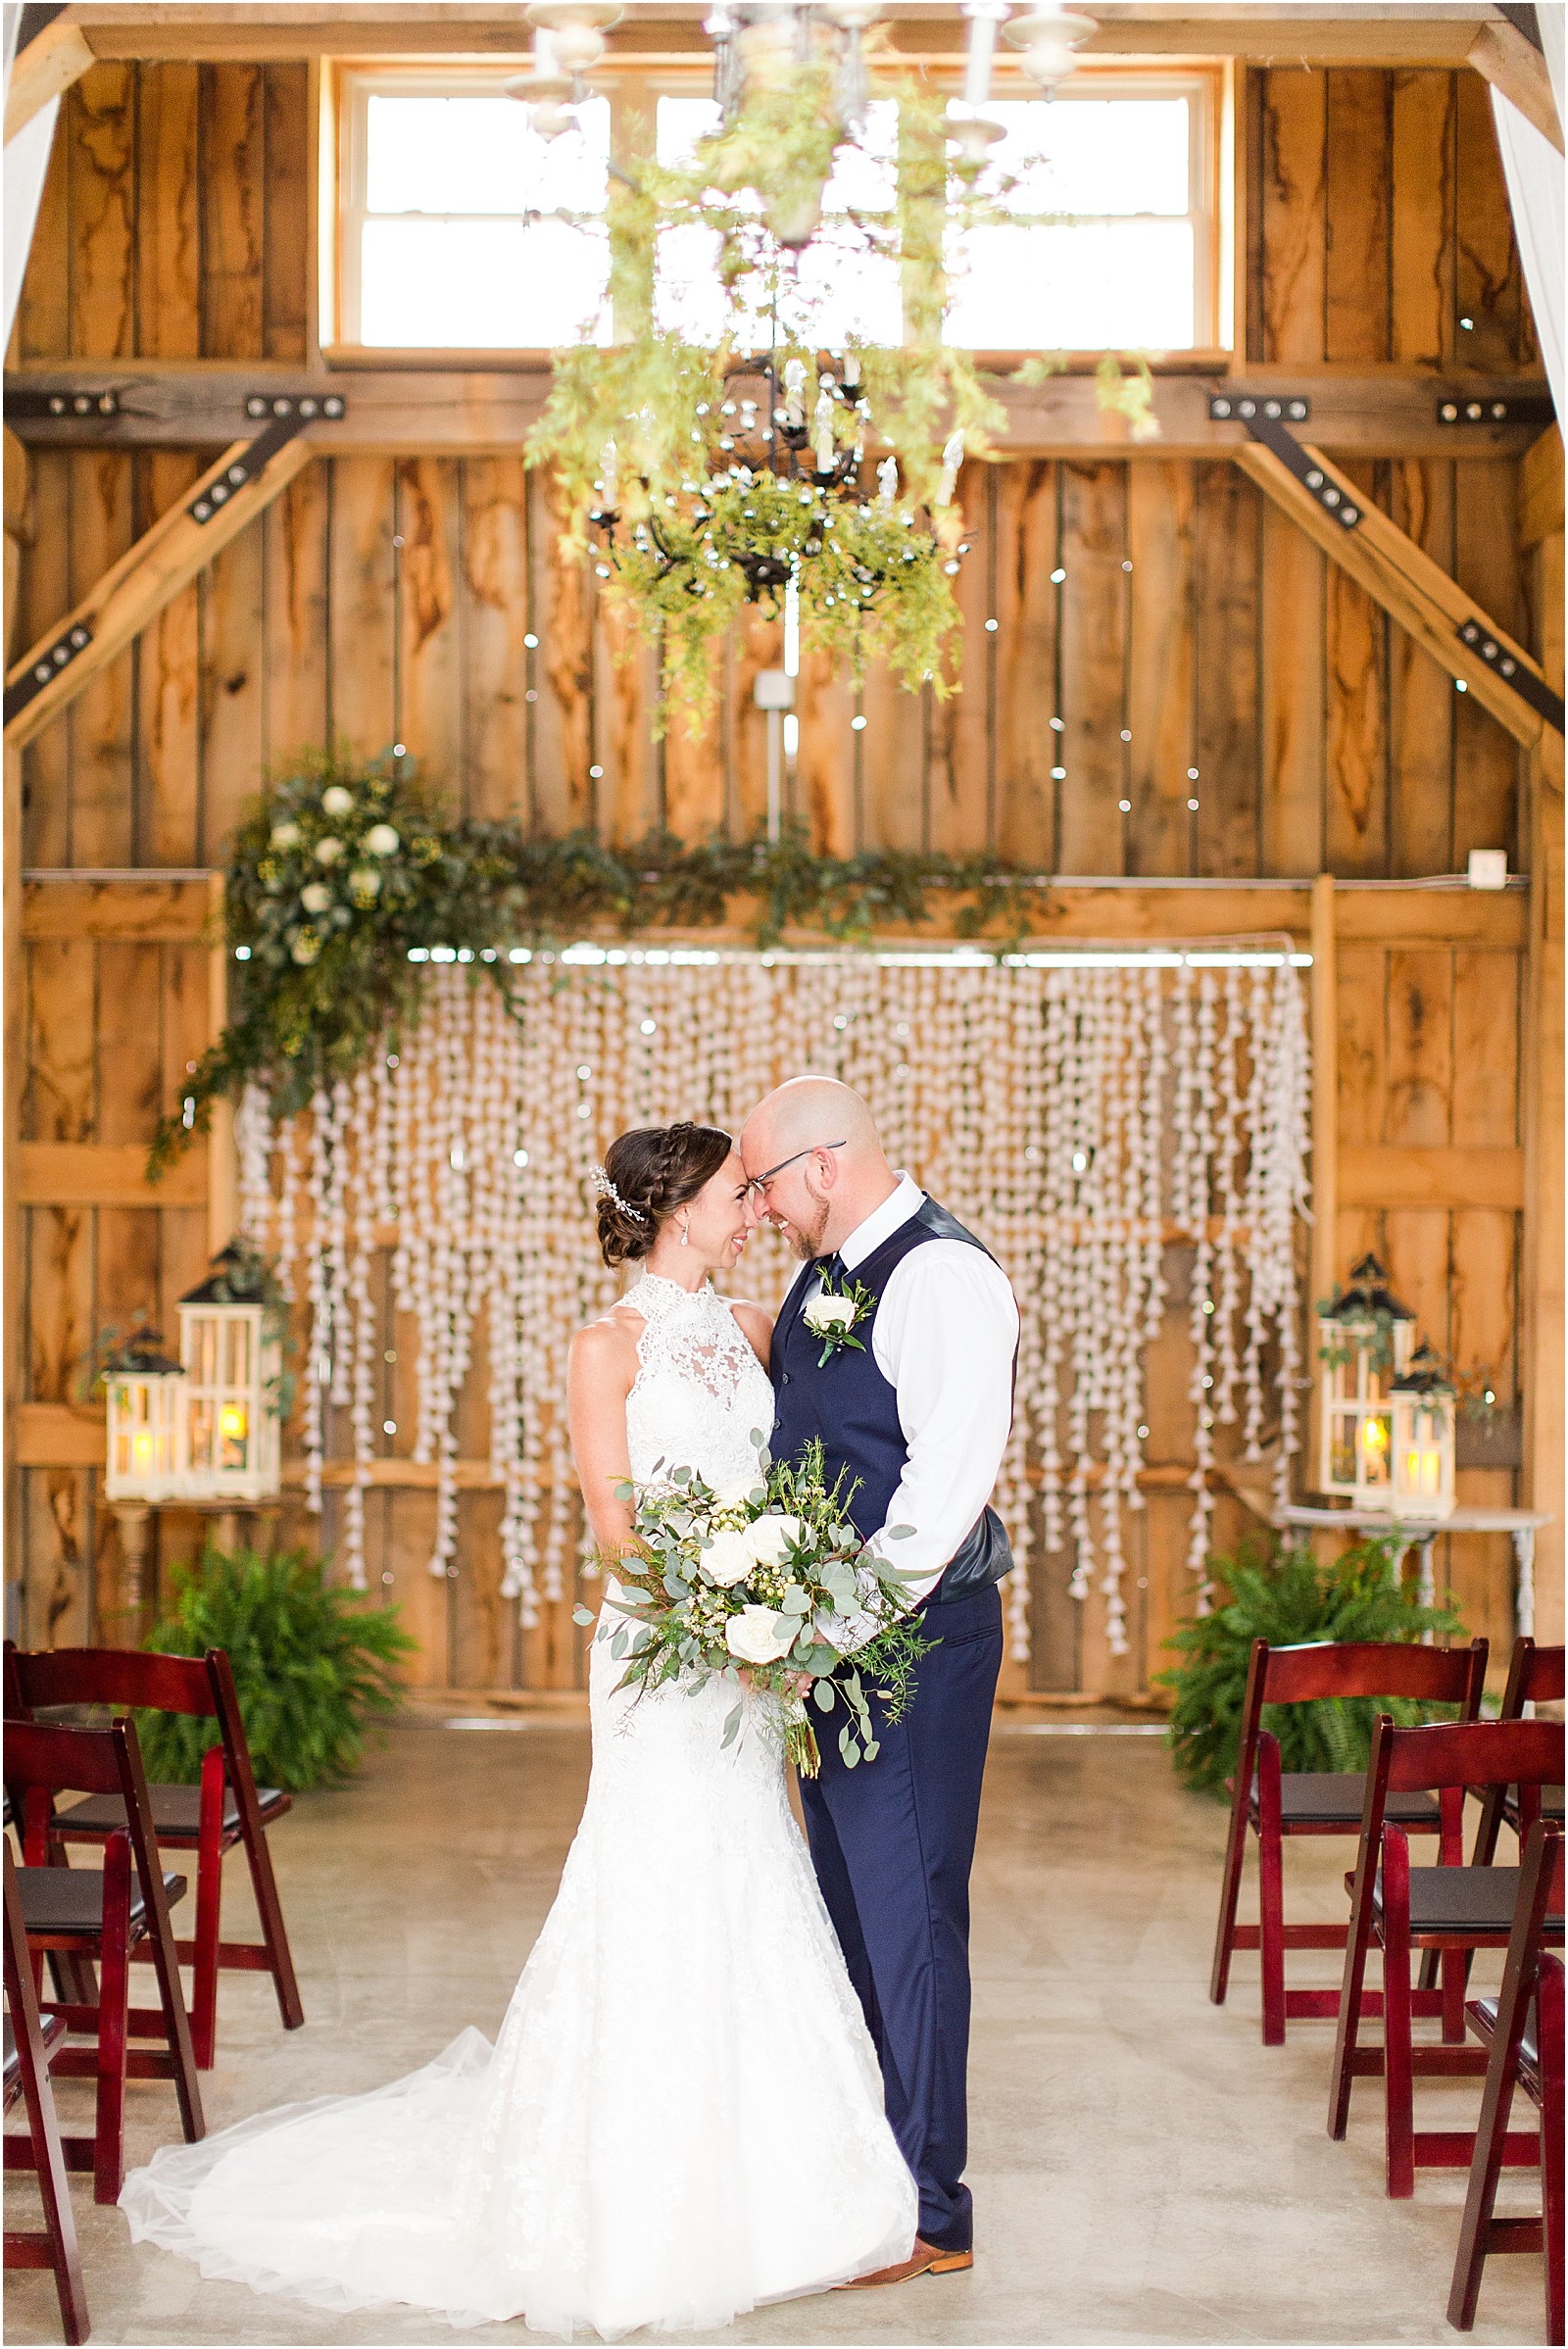 The Corner House Bed and Breakfast Wedding | Meagan and Michael075.jpg